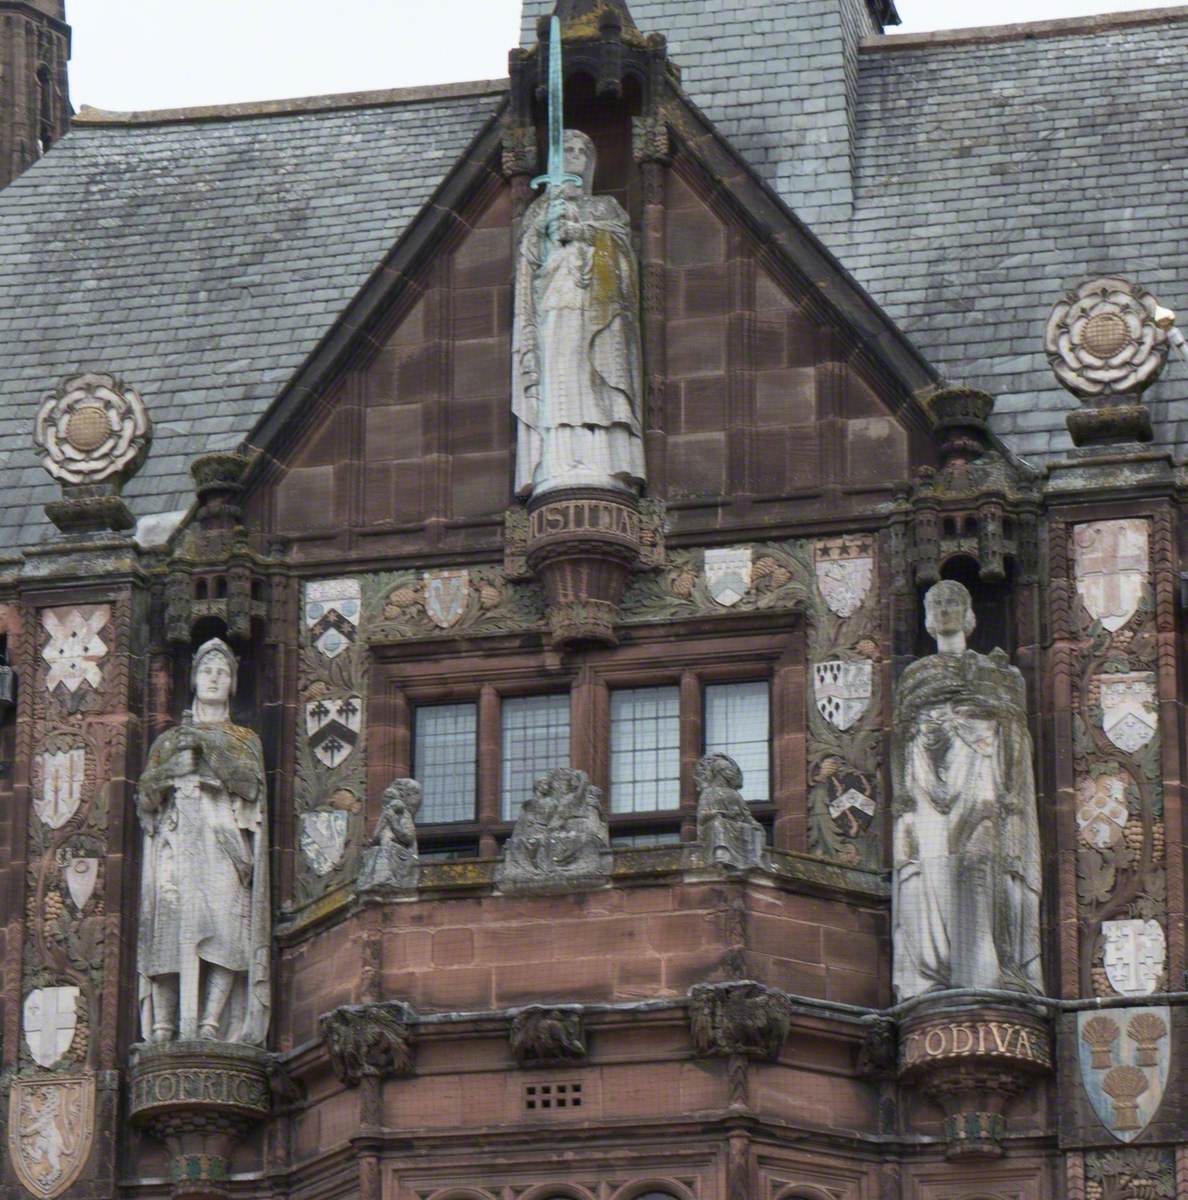 Leofric, Godiva and Justice and Statuary of Angels on Façade